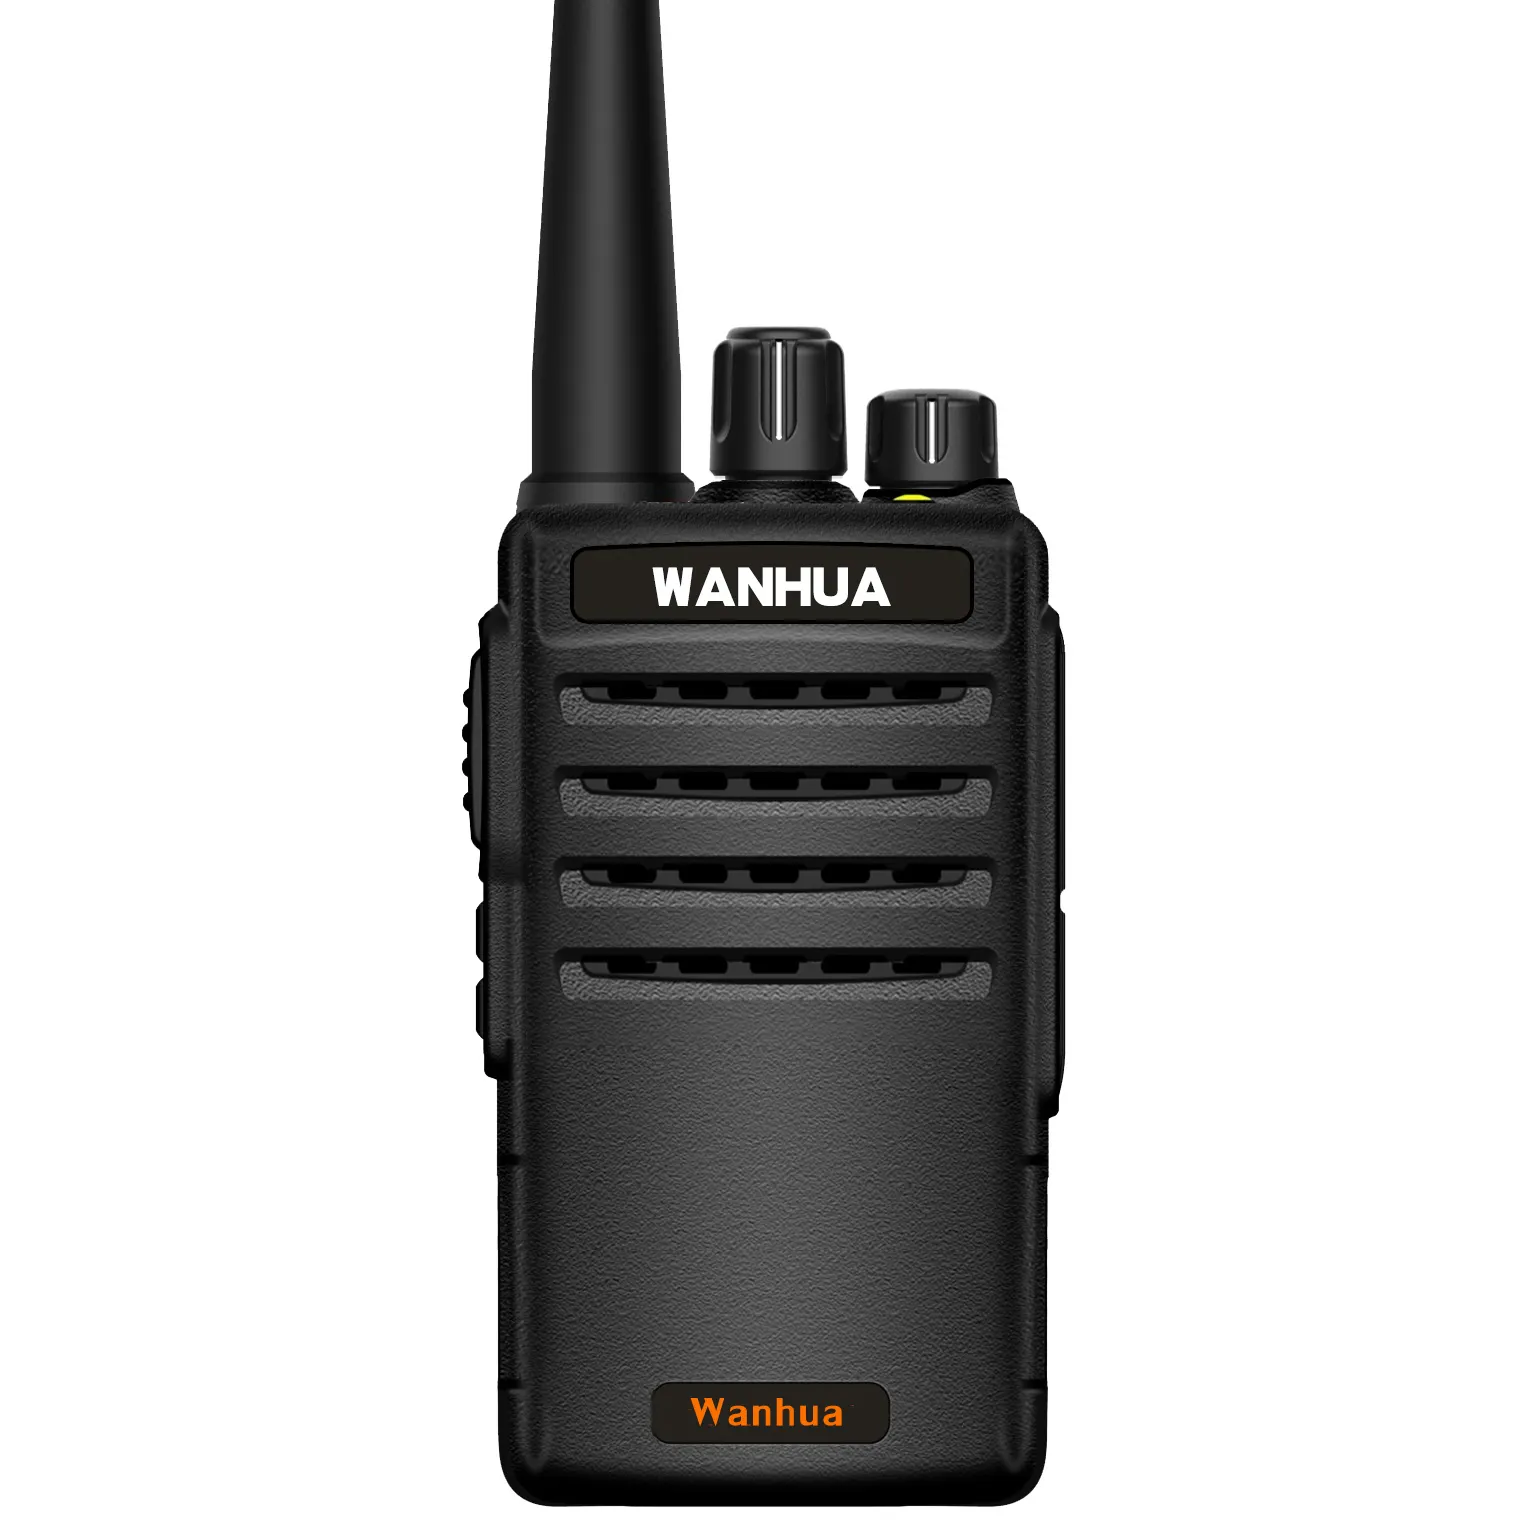 Waterproof Two Way Radio Dmr Analog Mixed Walkie Talkie for Commercial Use outdoor talky Tour guide system